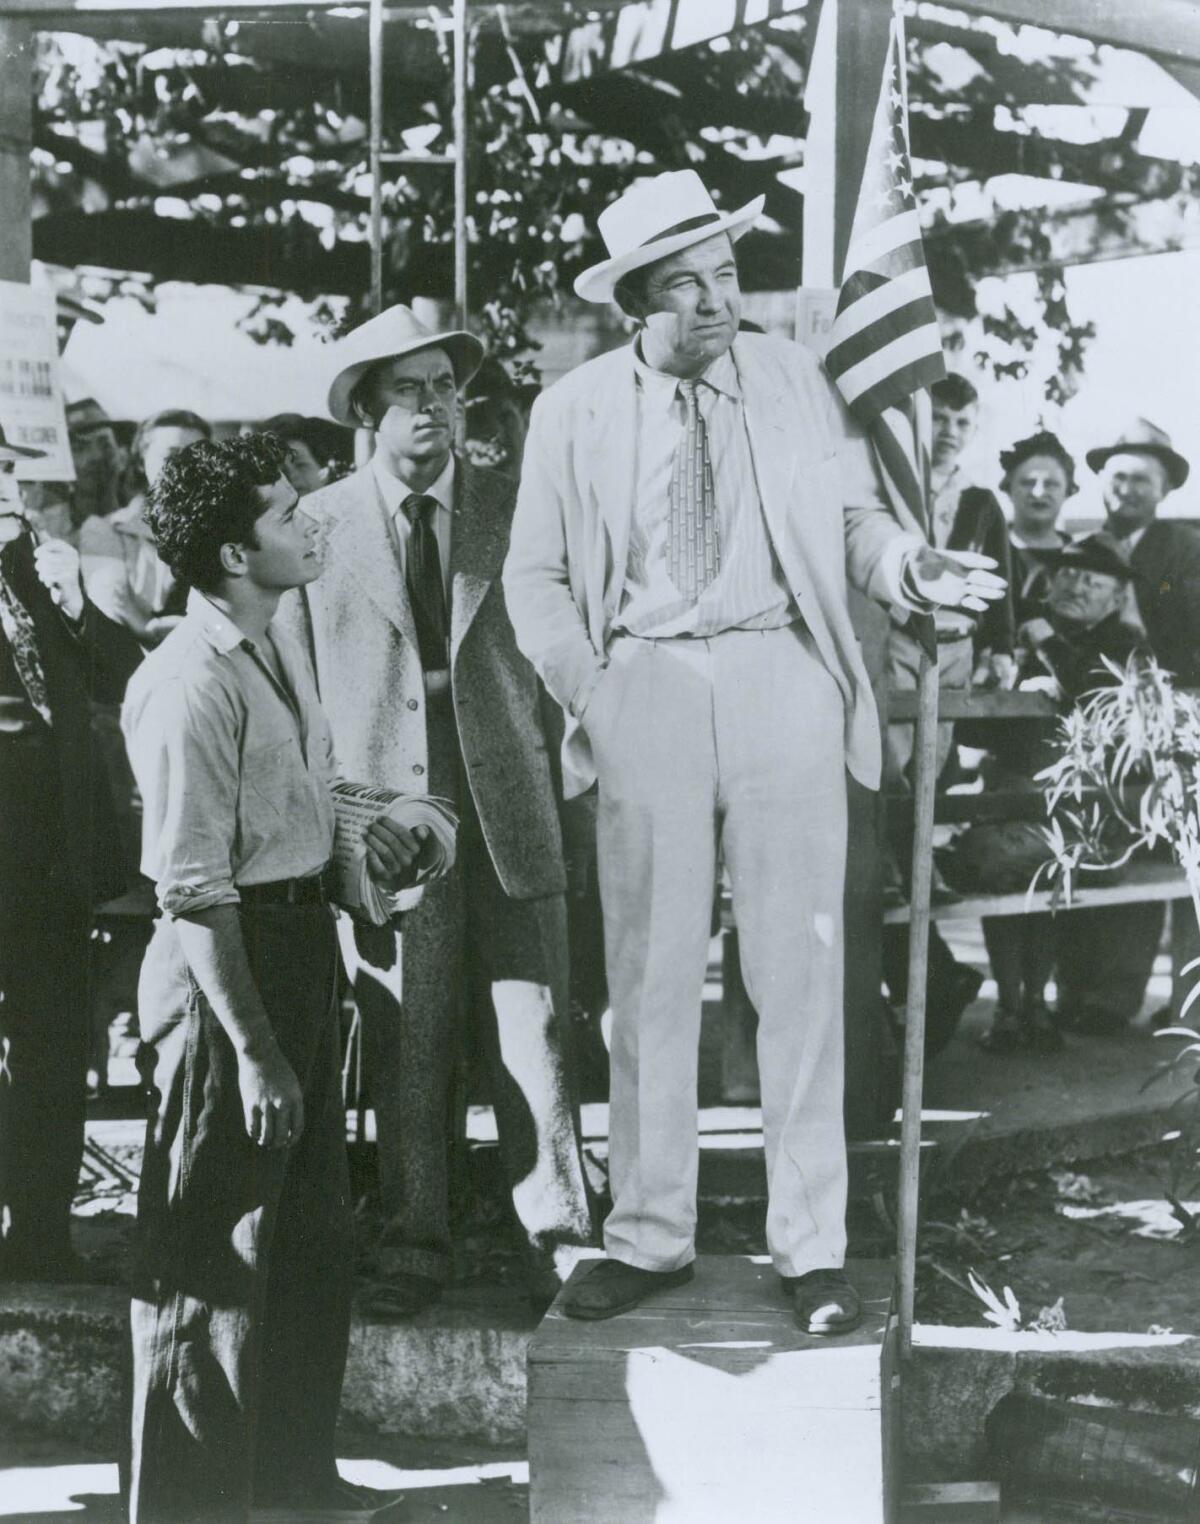 A black-and-white movie still of two men looking at another man in a light suit, standing outside, with a crowd behind them.